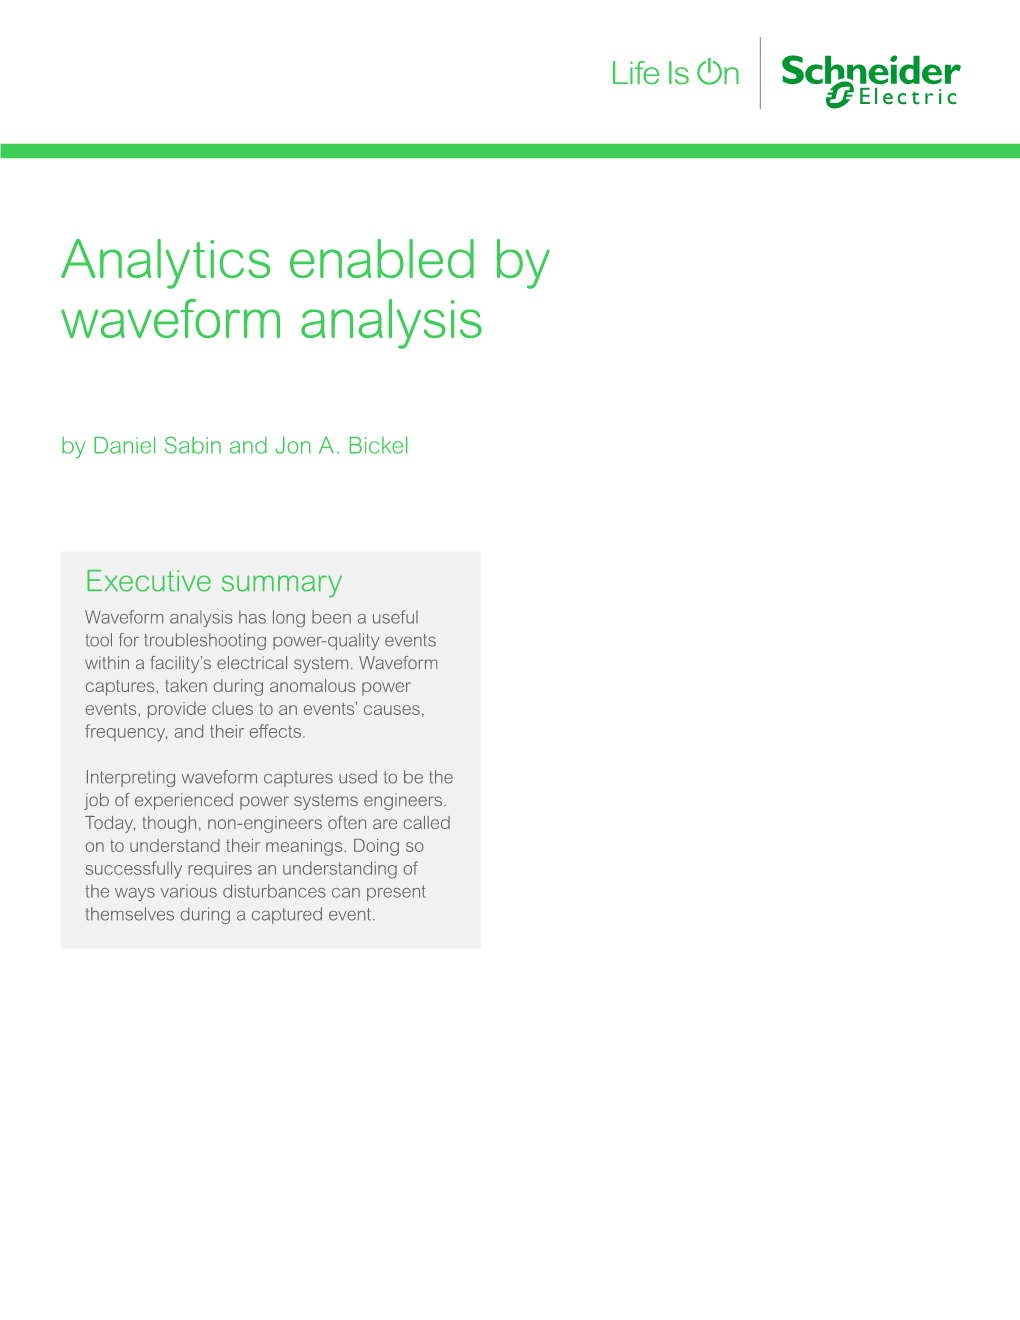 Analytics Enabled by Waveform Analysis